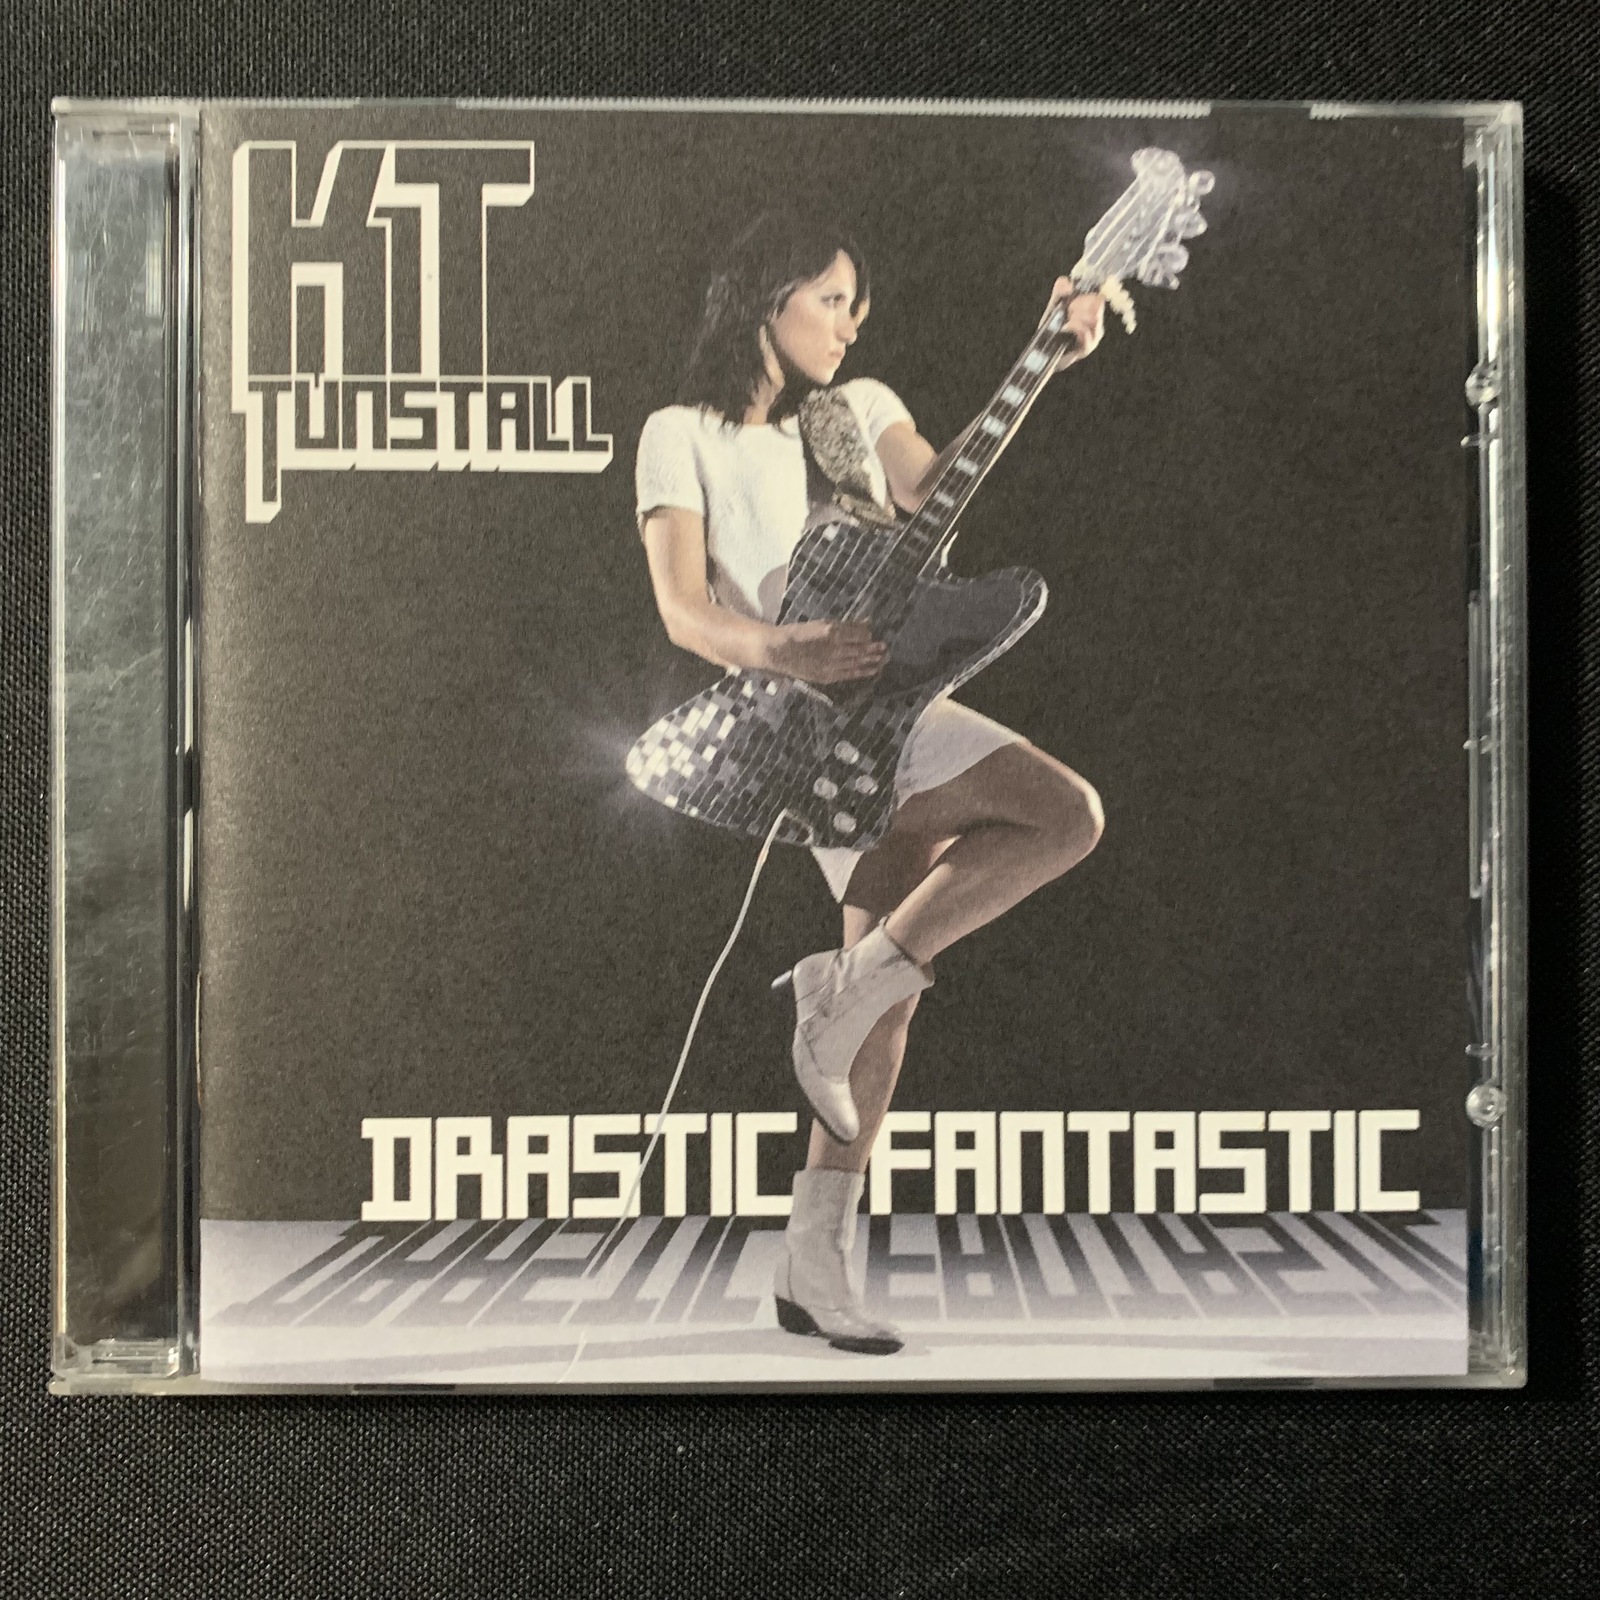 Primary image for CD KT Tunstall 'Drastic Fantastic' (2007) Hold On! Saving My Face! If Only!